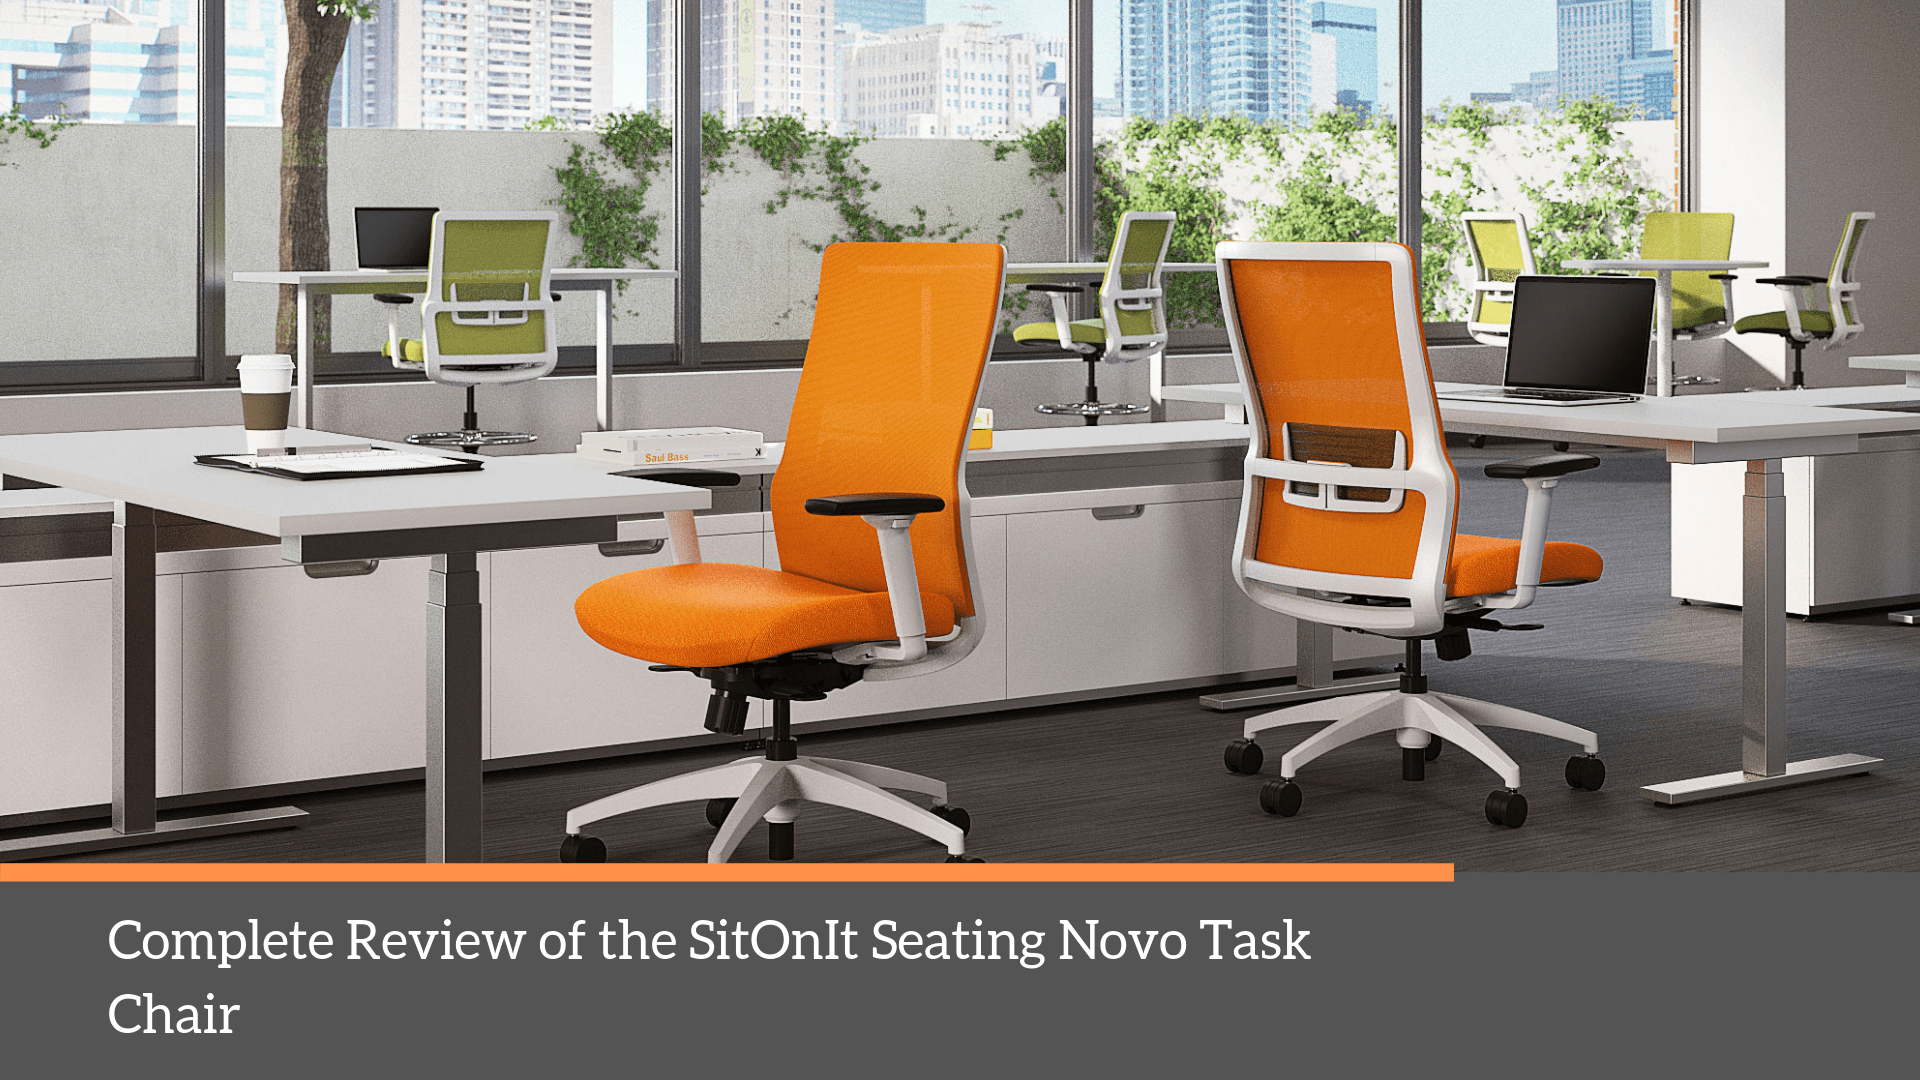 Complete Review of the SitOnIt Seating Novo Task Chair